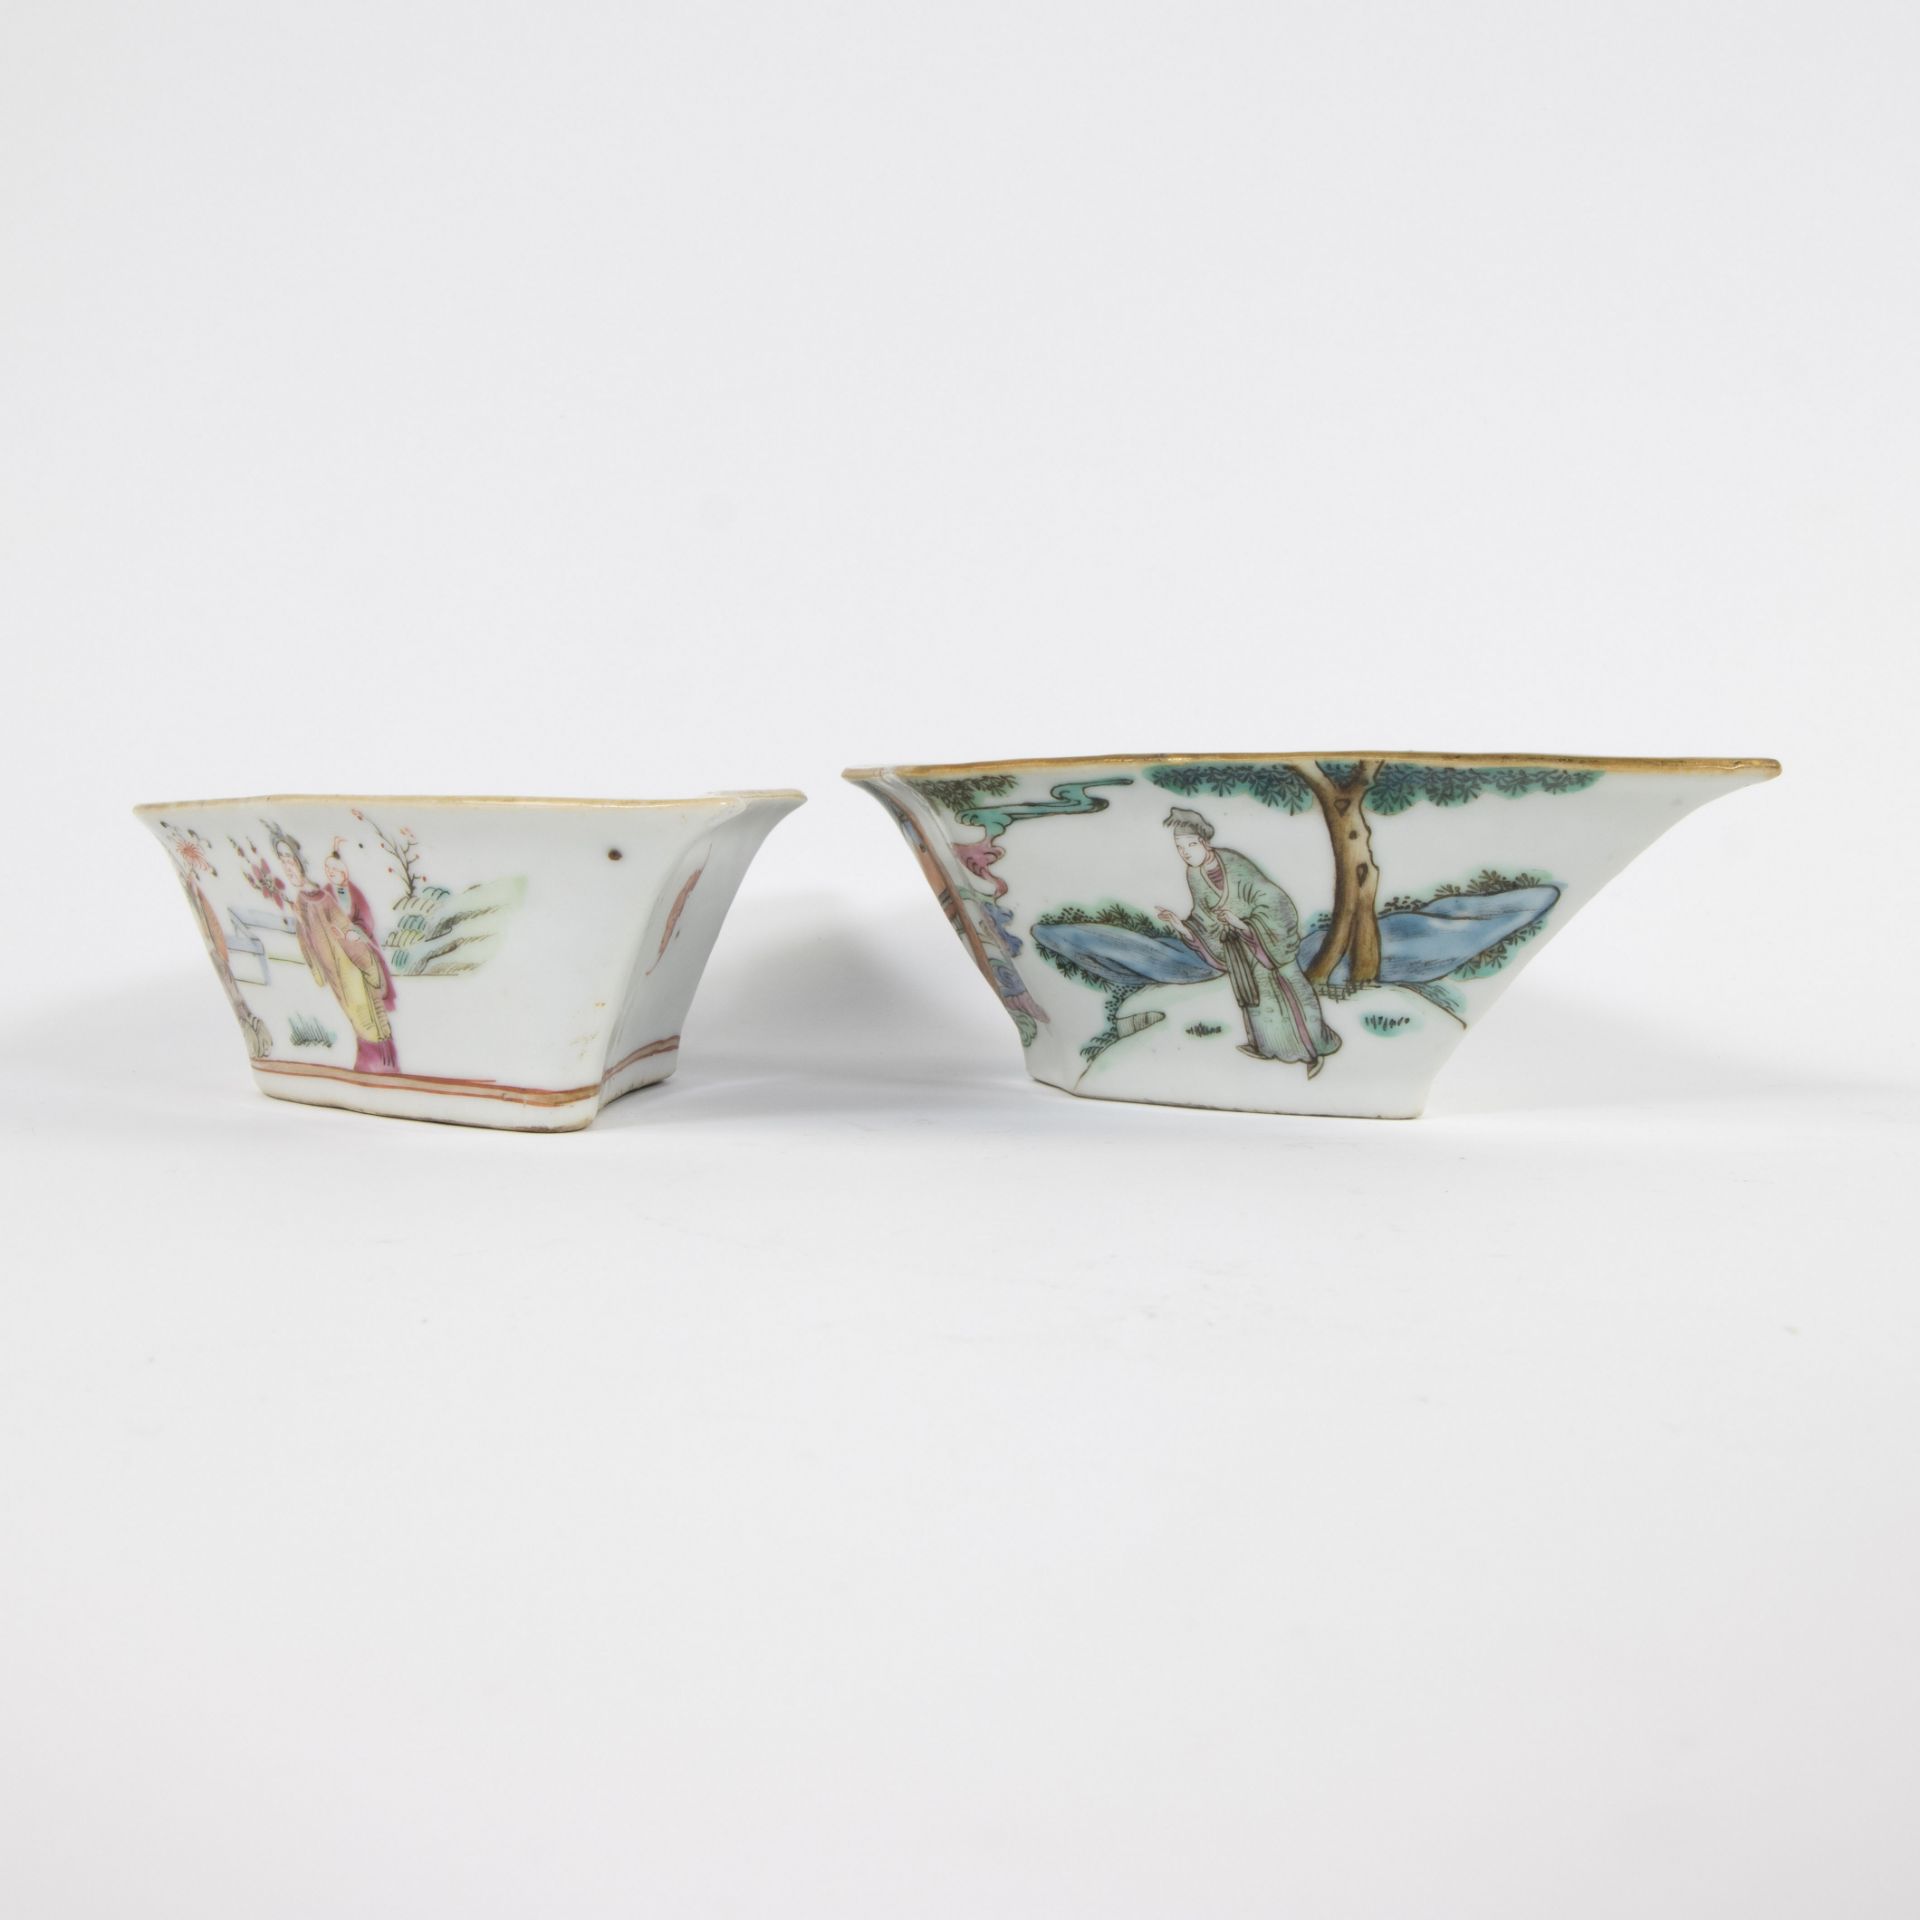 Collection Chinese 2 bowls 1 marked Tongxhi and Imari plate 18th century - Image 5 of 9